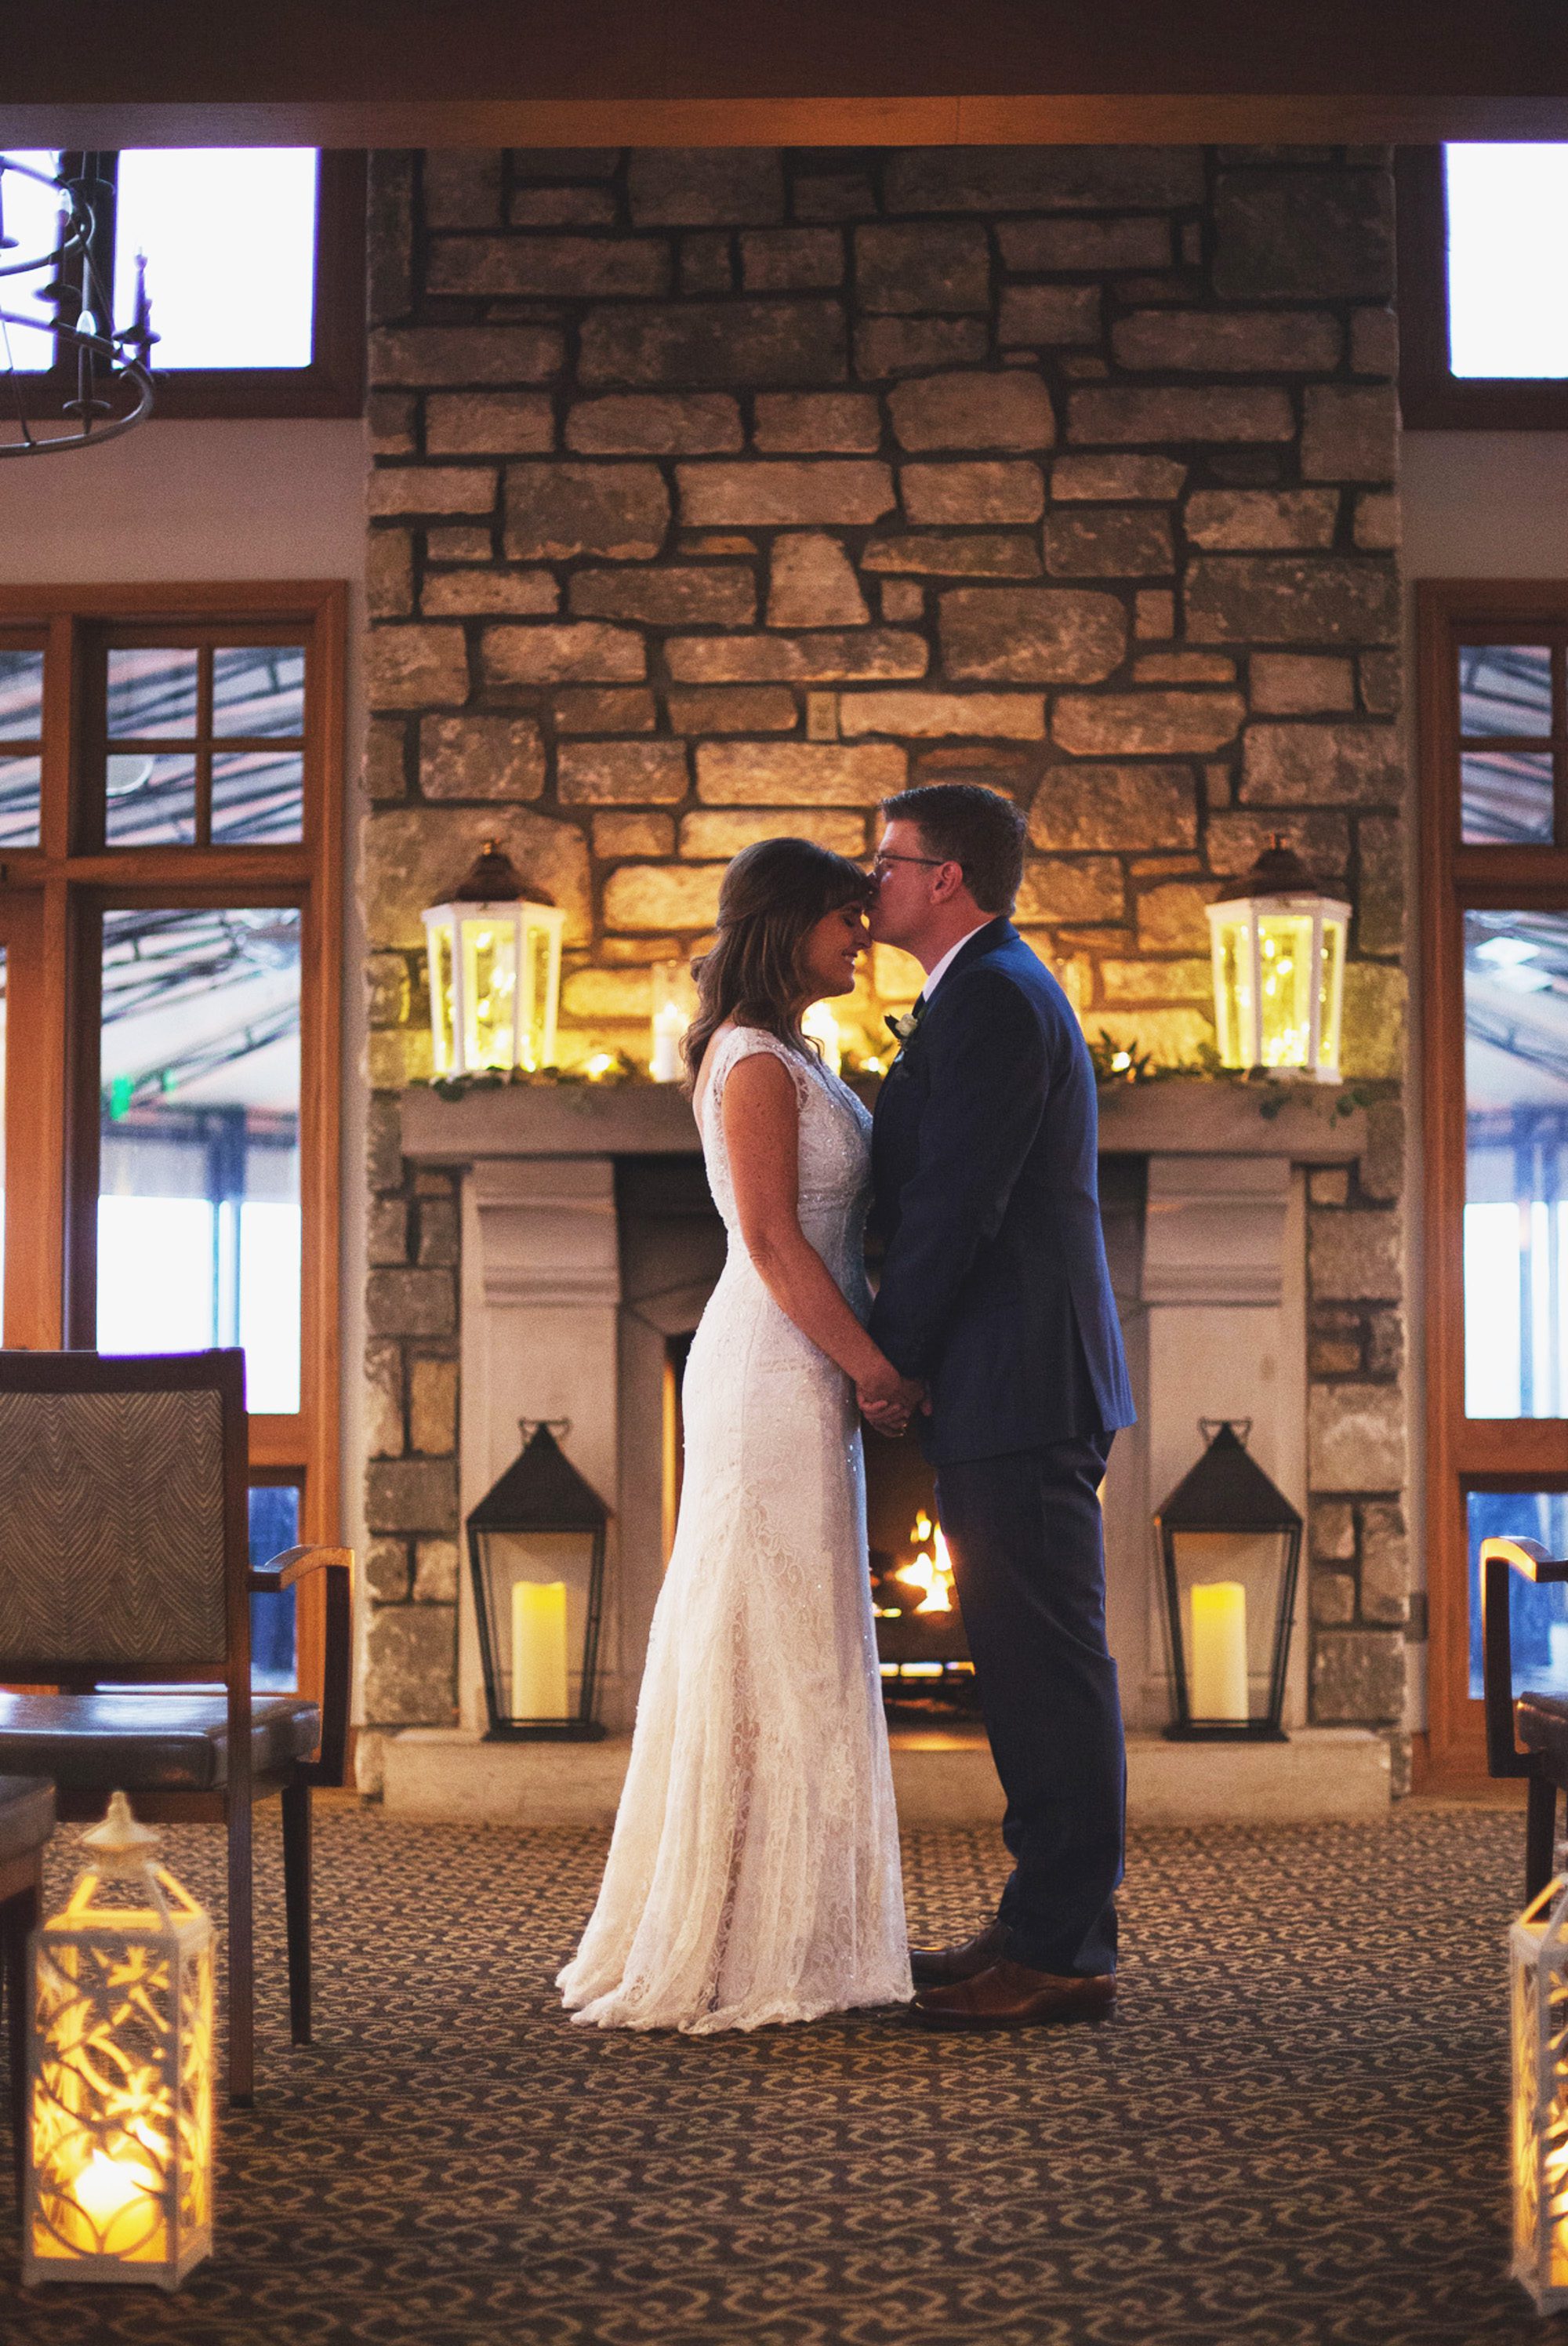 Candlelit photo of bride and groom before wedding ceremony. Winter wedding at Vanderbilt Legends Golf Course in Brentwood TN, photos by Krista Lee Photography